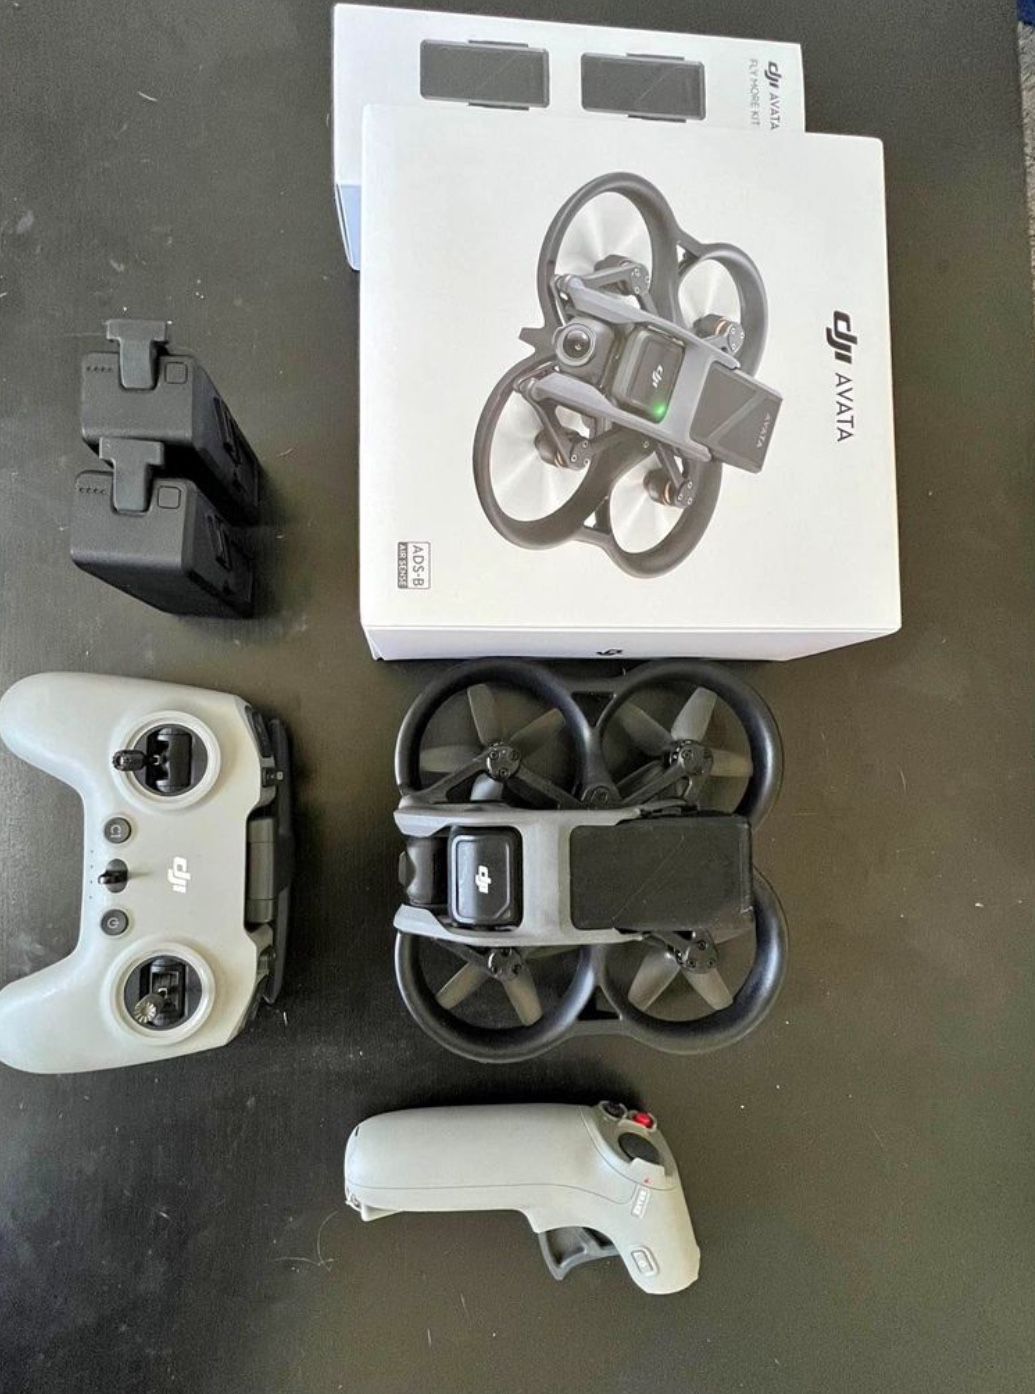 DJI Avata Fly More Package